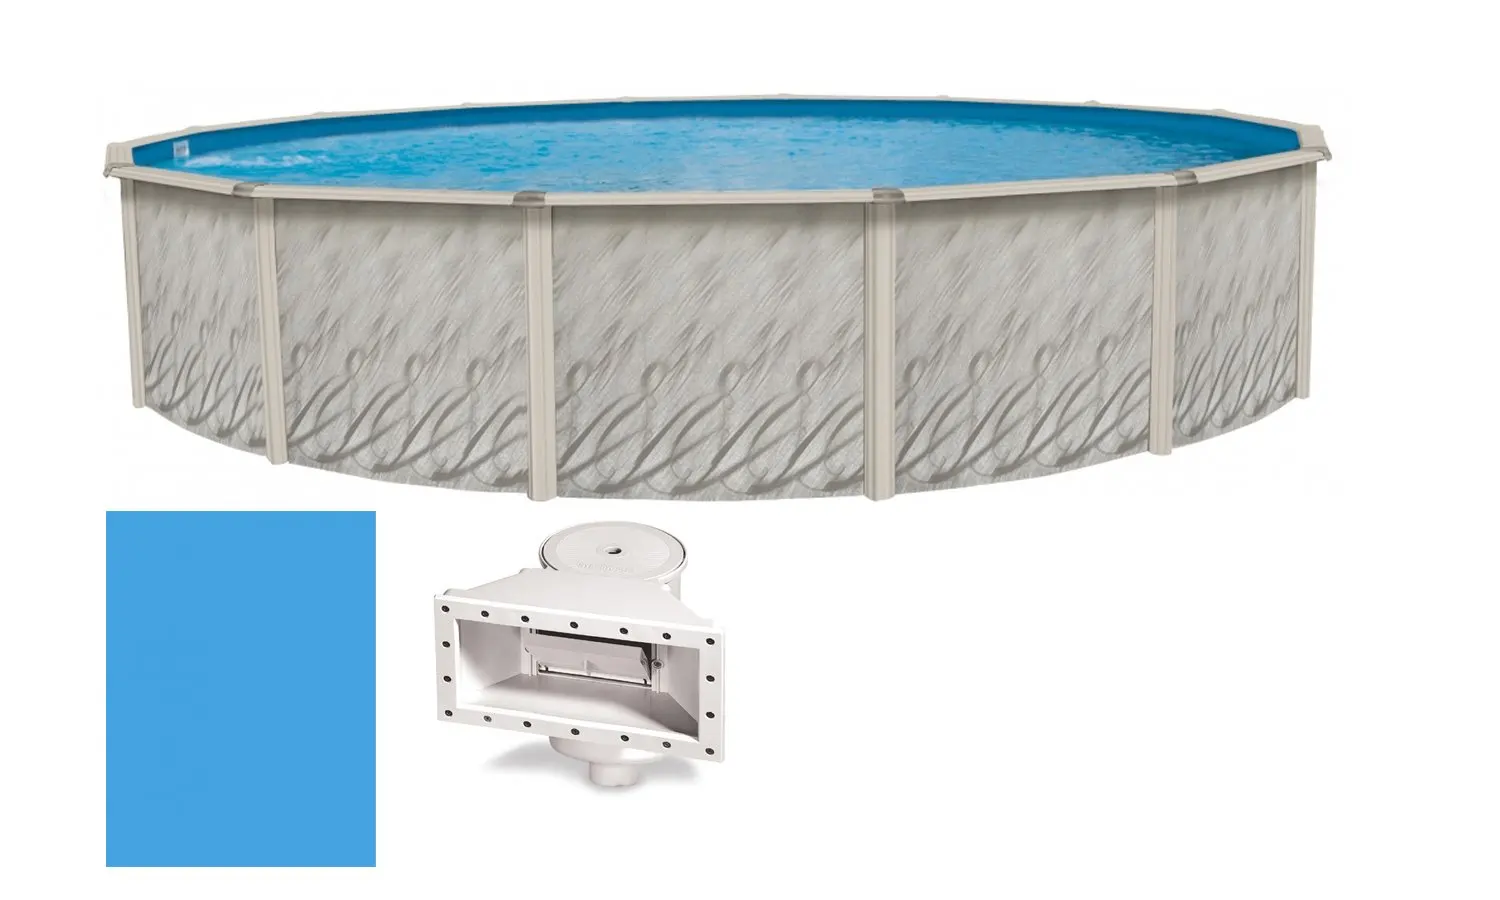 Wilbar Meadows Reprieve 12-Foot Round Above-Ground Swimming Pool 52-Inch He...